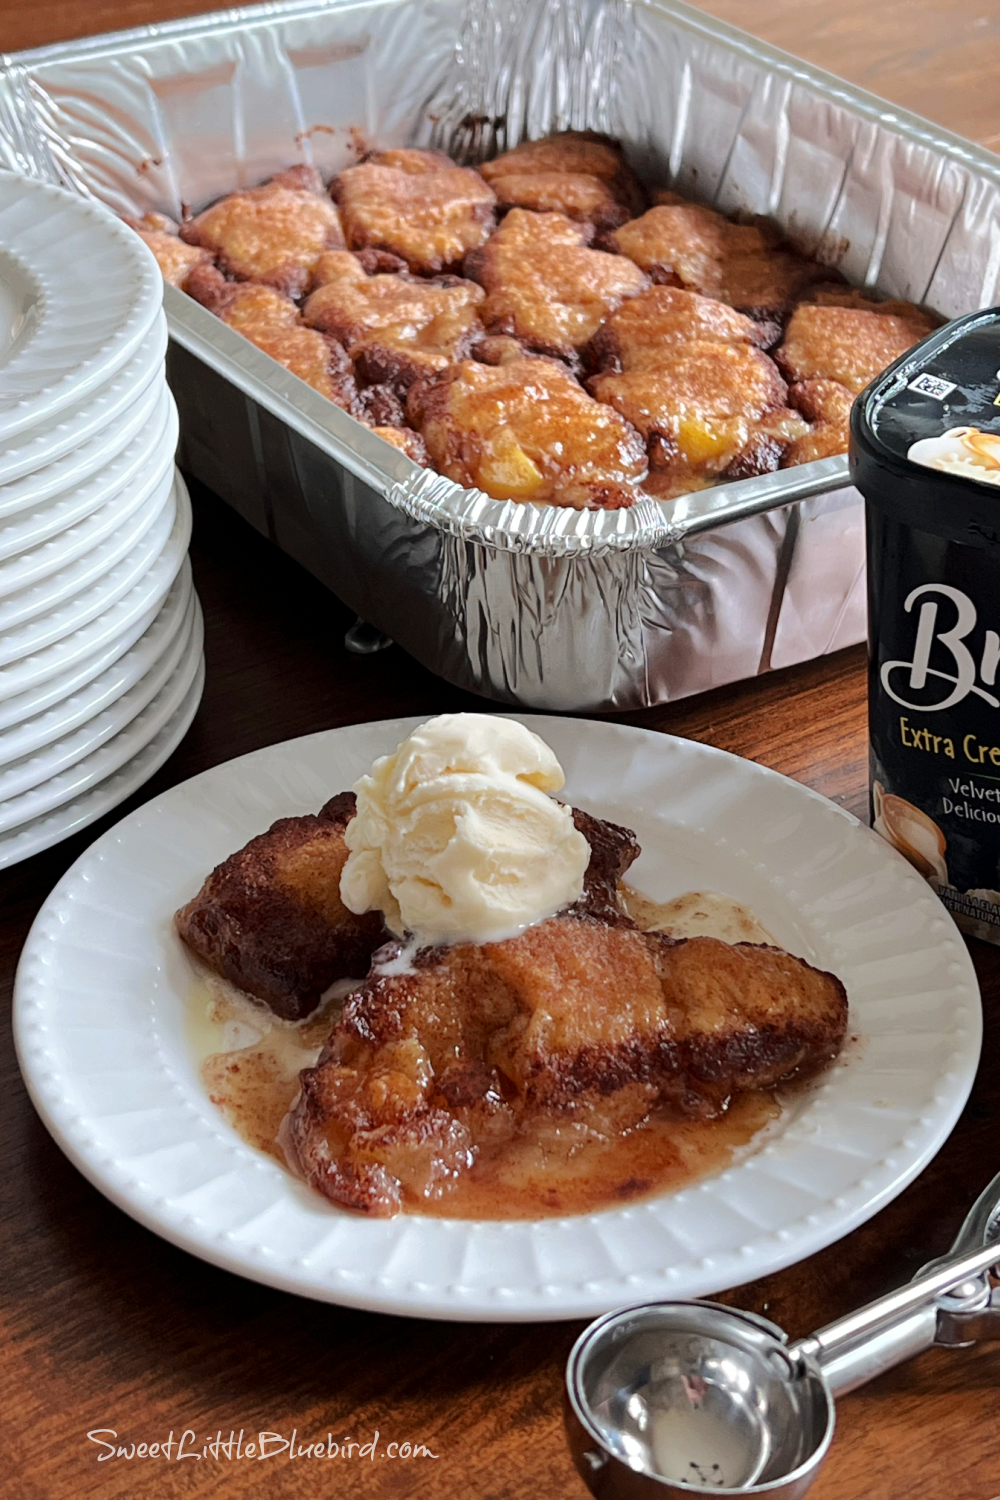 This photo shows 2 peach dumplings on a plate with a scoop of vanilla ice cream on top. 